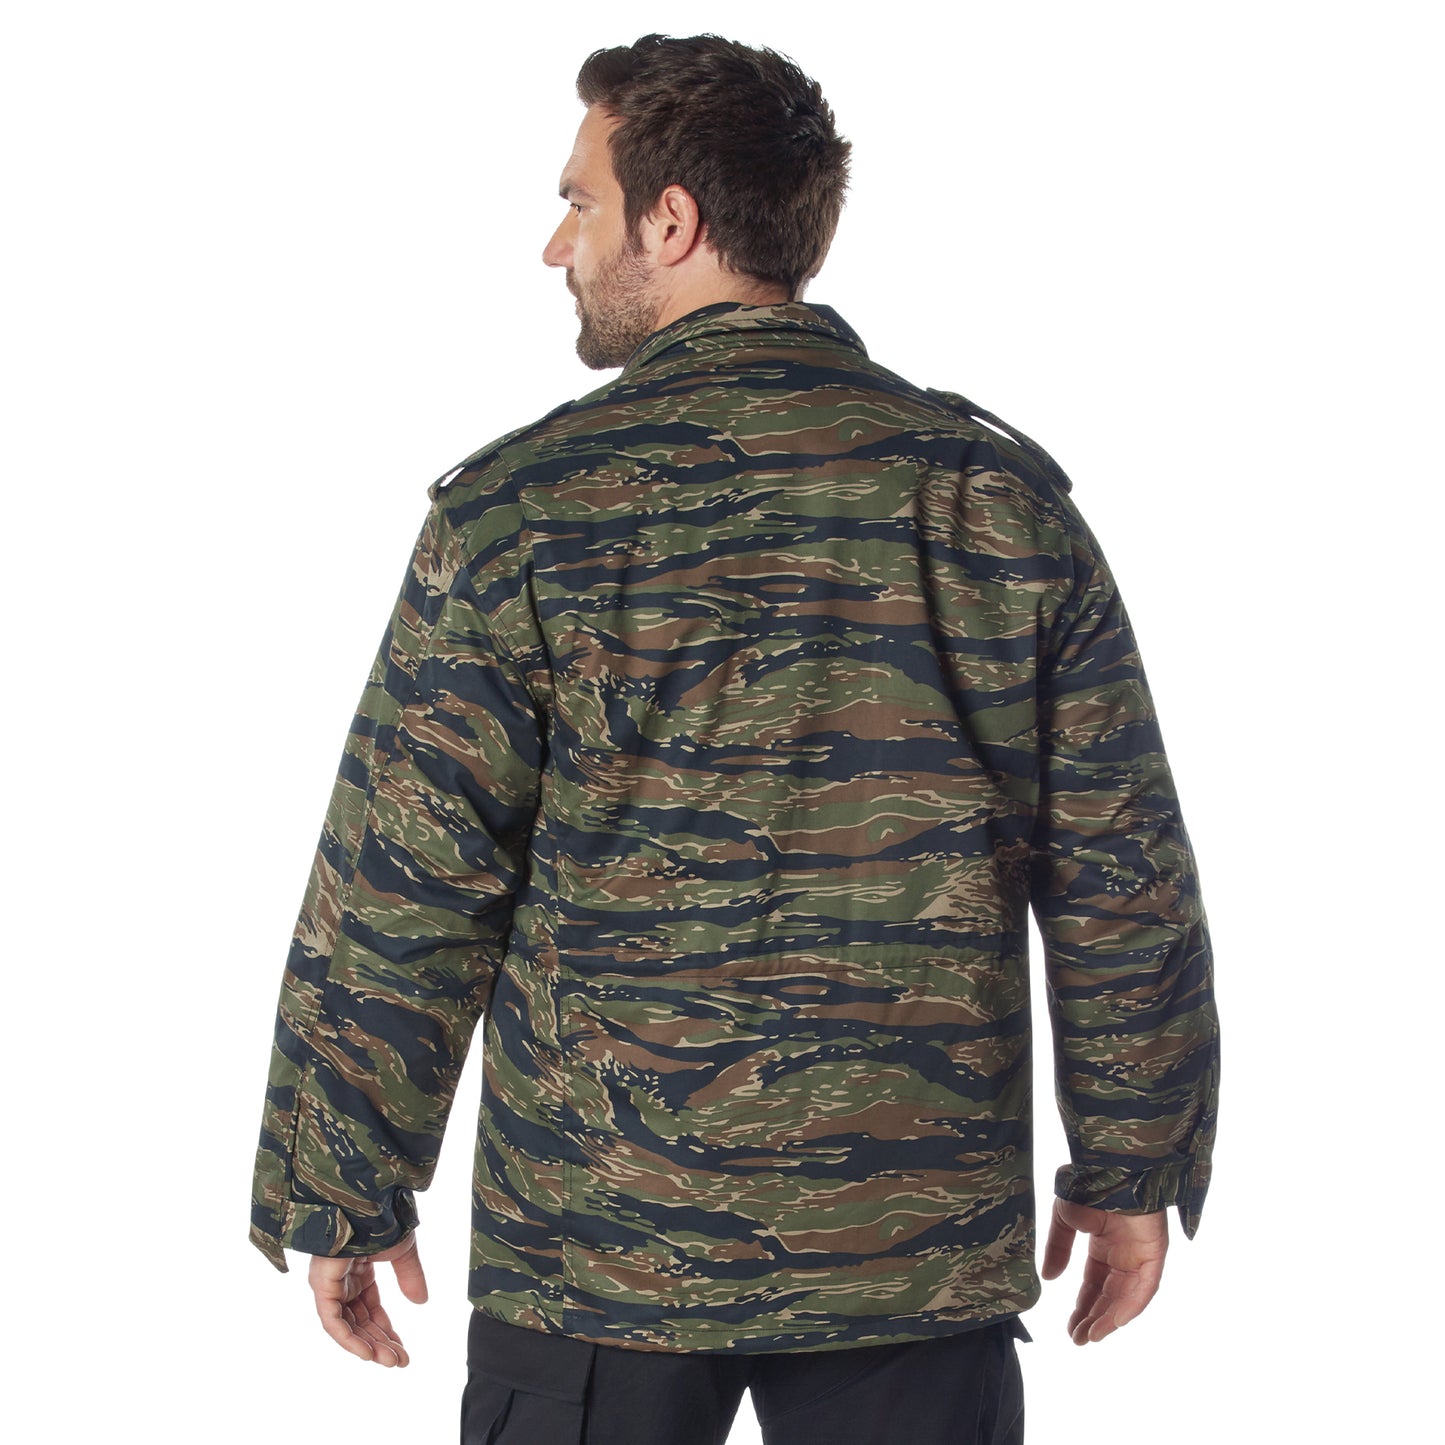 Mens Tactical Field Jacket Rothco M-65 Tiger Stripe Camouflage Camo Coat